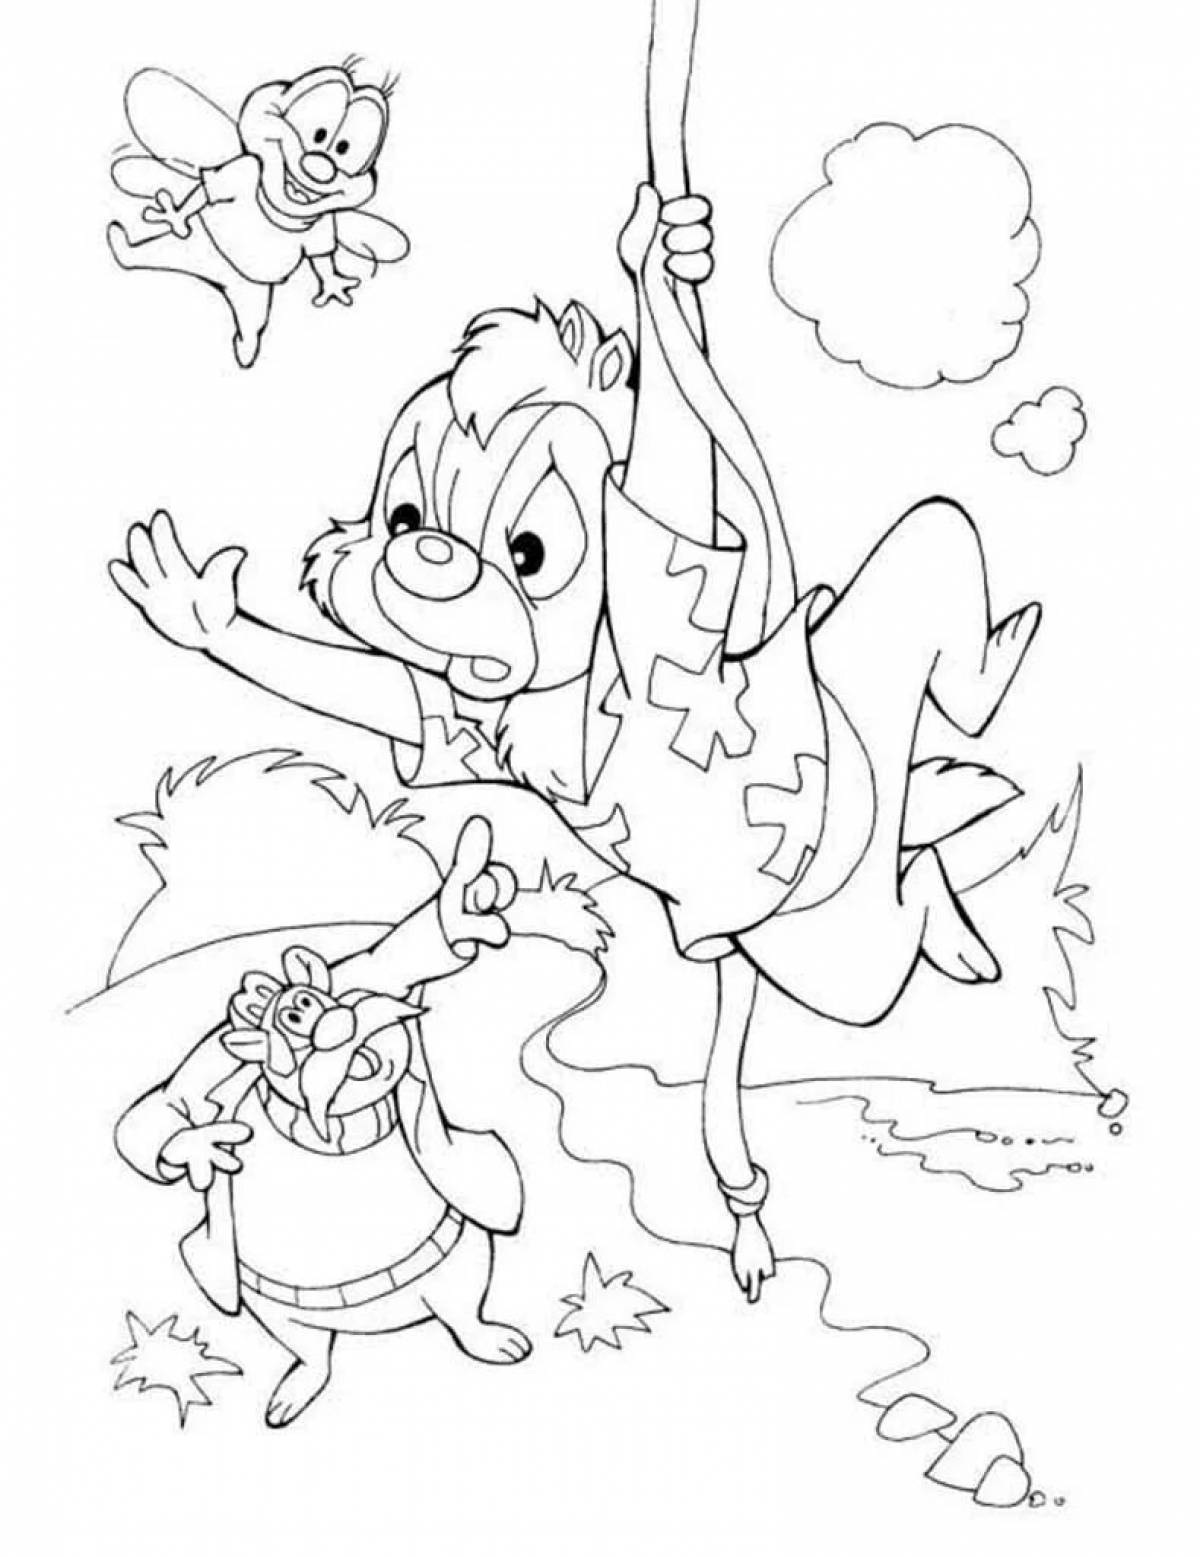 Cute chip and dale coloring pages for kids